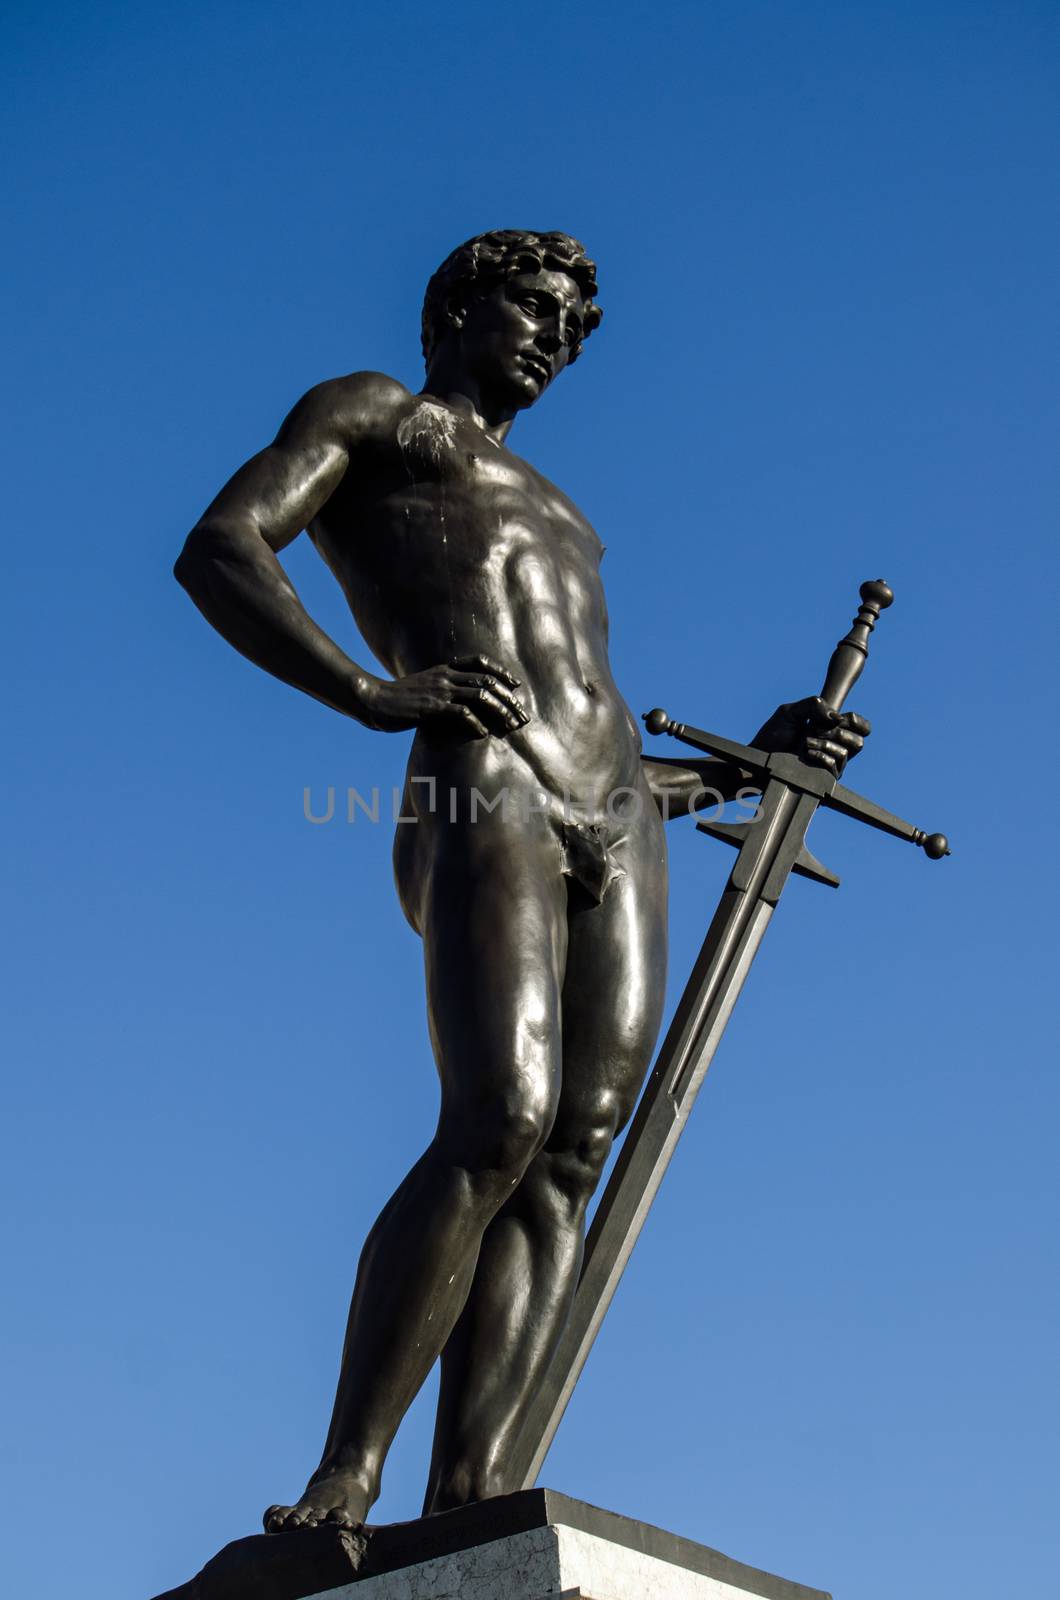 The Boy David statue on top of the Machine Gun Corps Memorial at London's Hyde Park Corner.  Sculpted by Francis Derwent Wood and unveilled in 1925 in memory of those killed in World War I.  